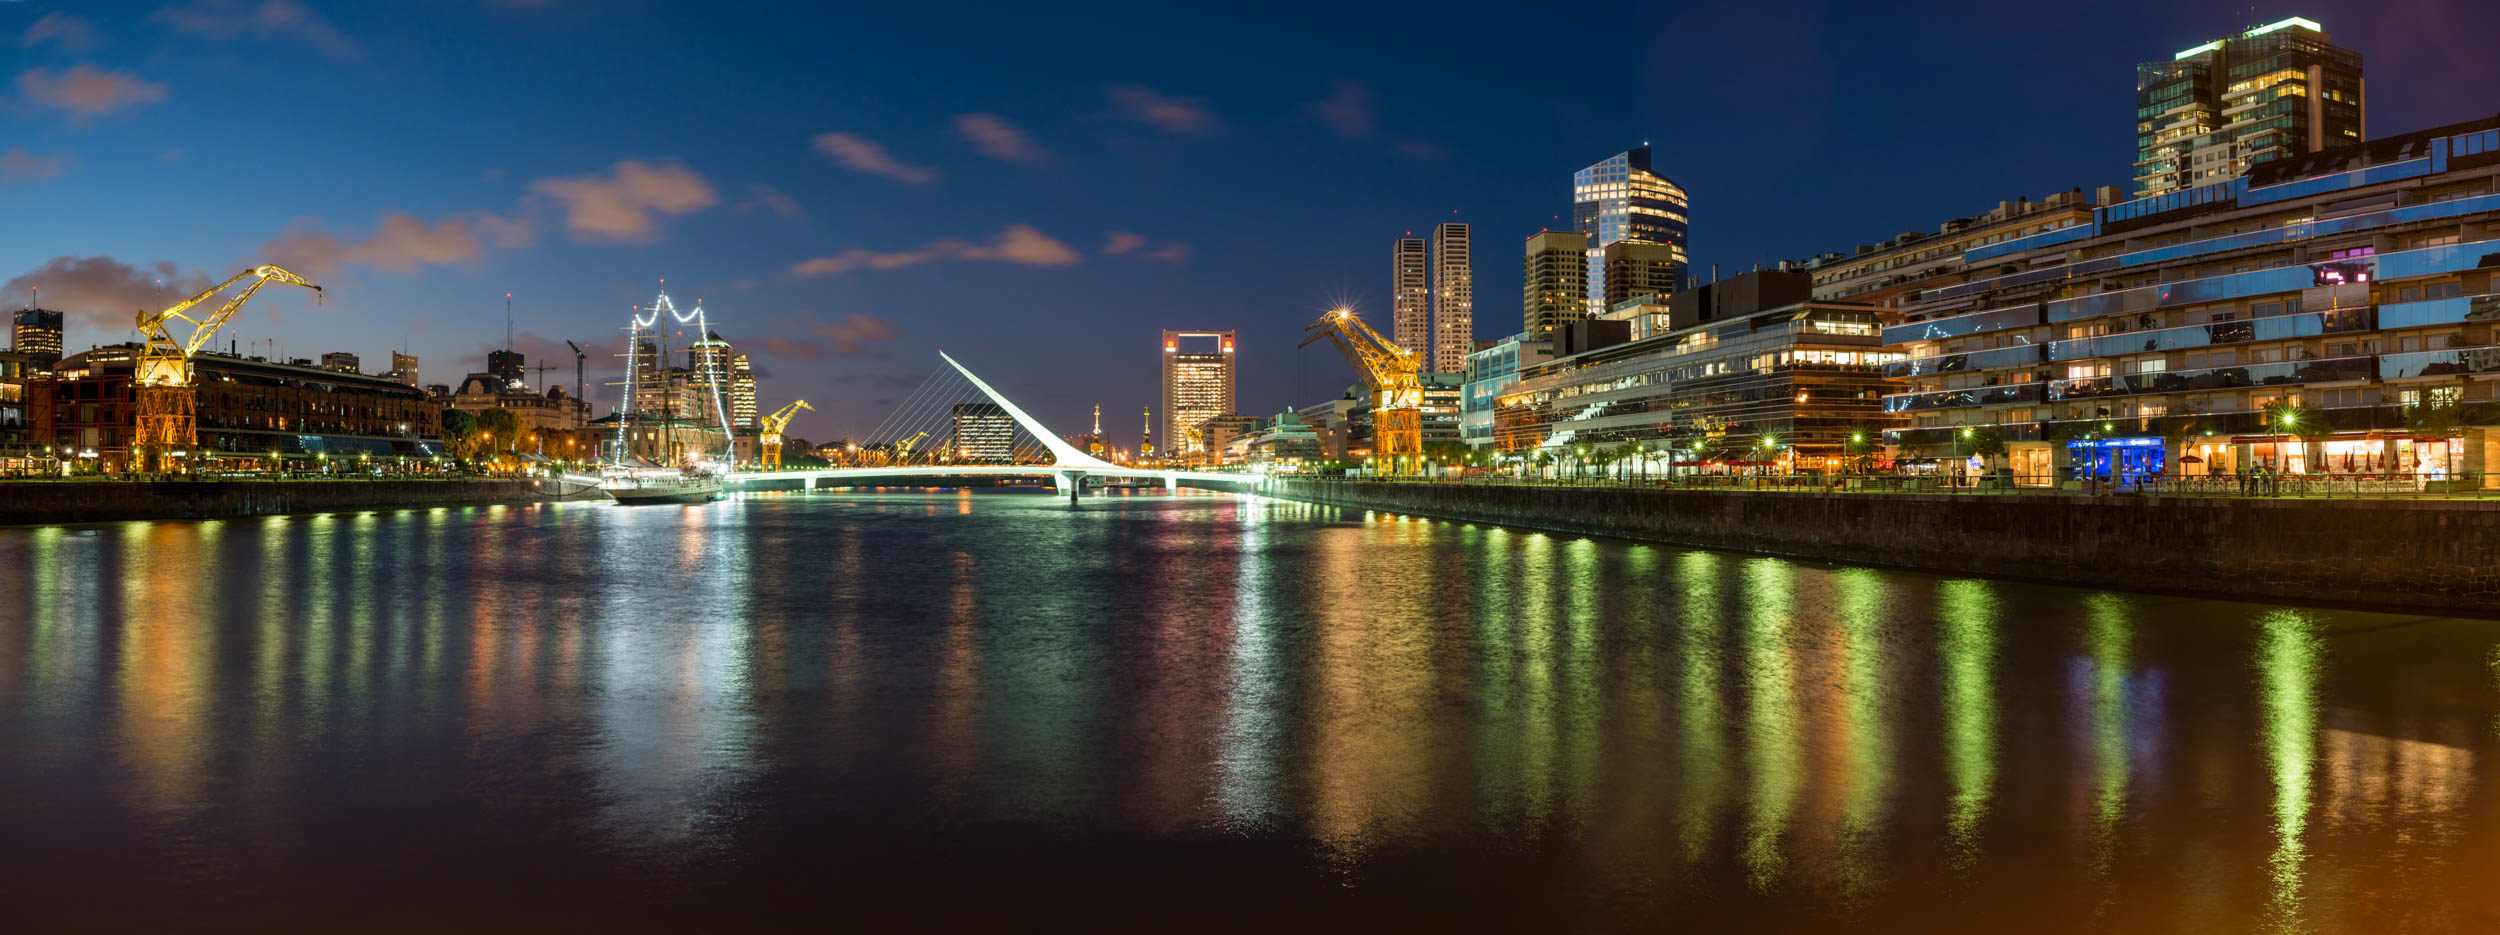 panoramic-city-dusk-buenos-aires-argentina-puerto-madero